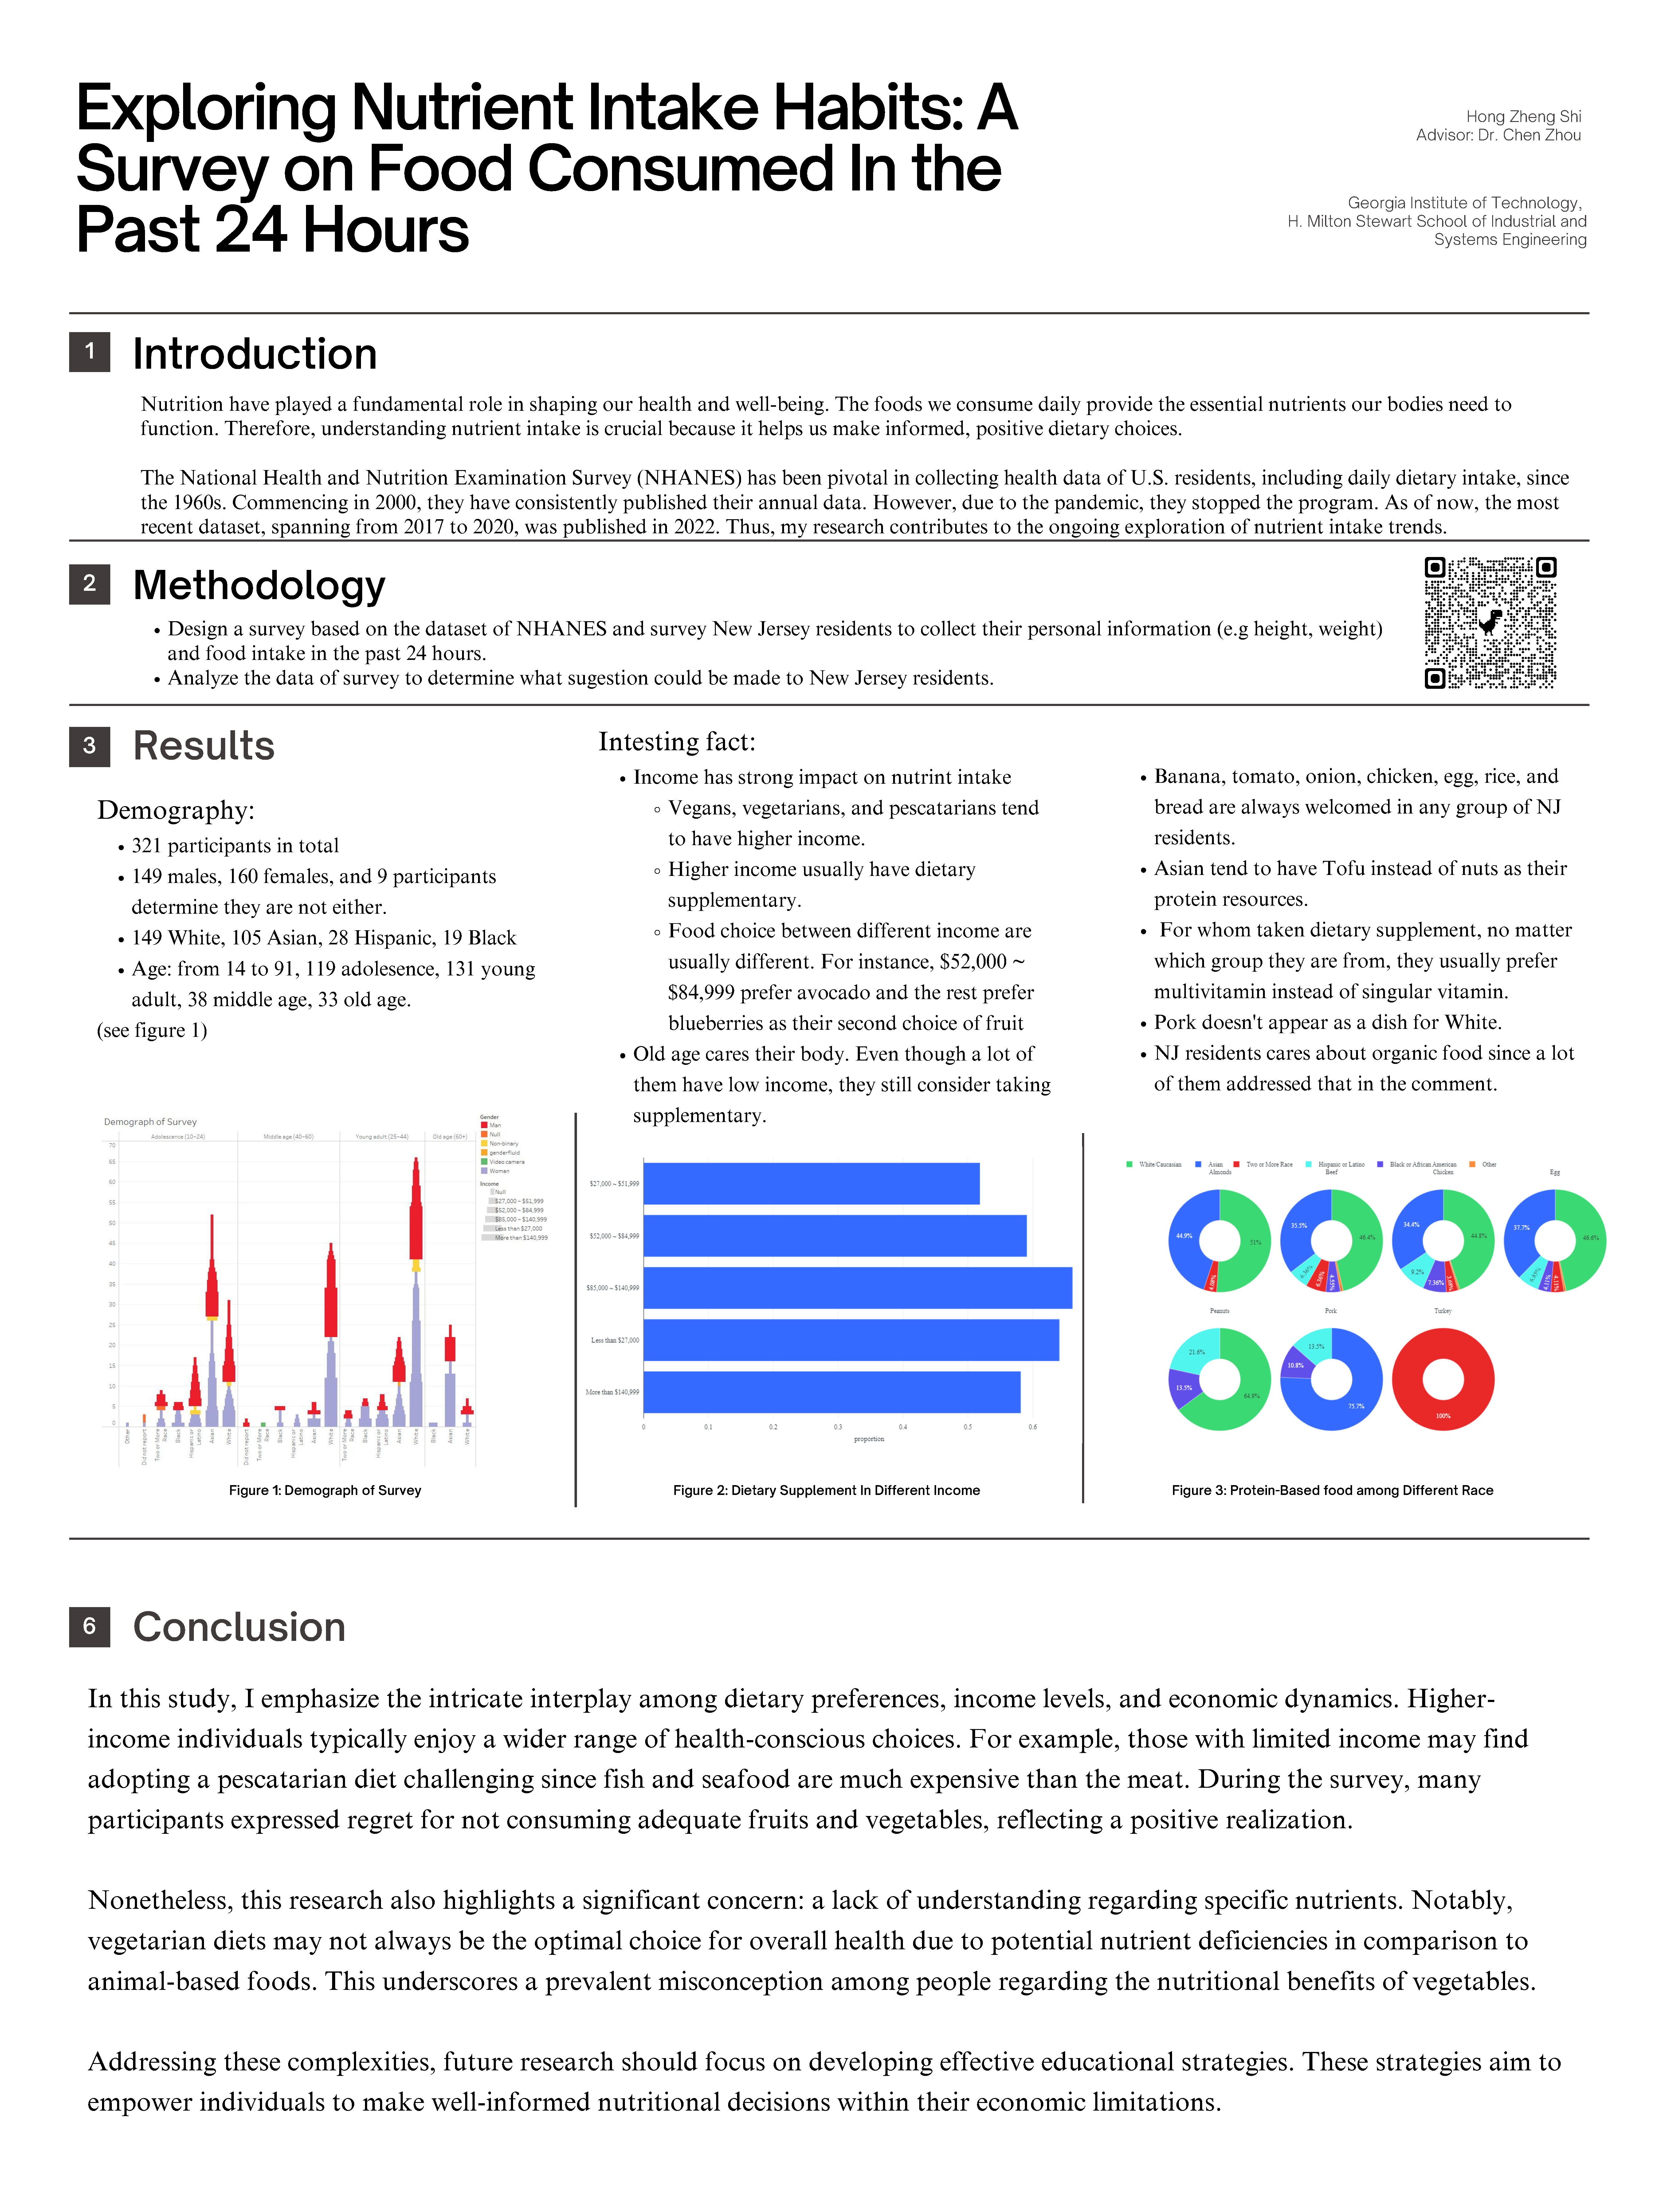 Exploring Nutrient Intake Habits: A Survey on Food Consumed In the Past 24 Hours poster